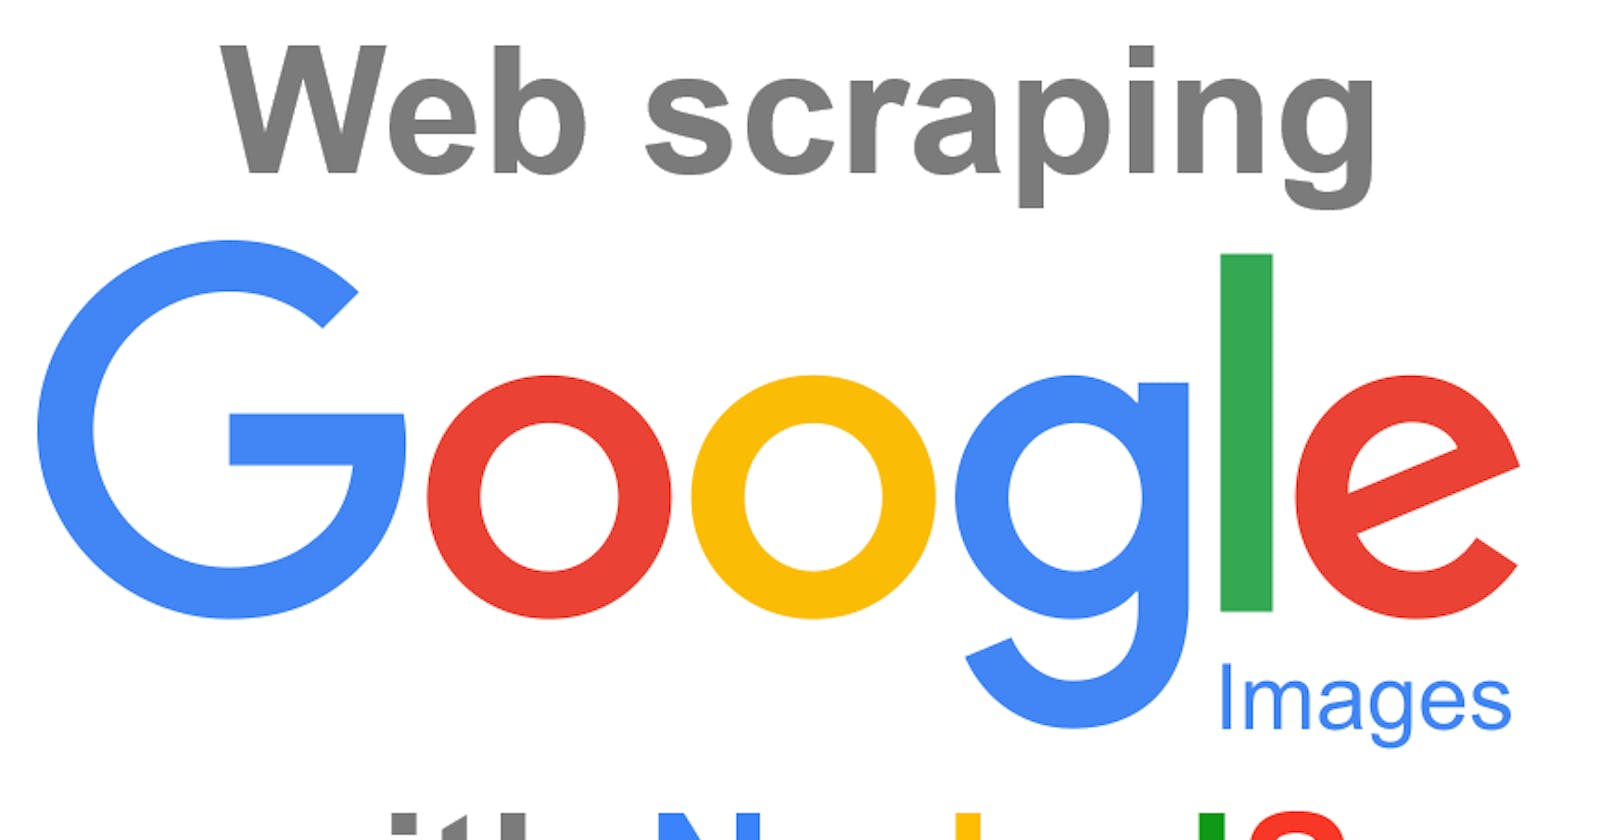 Web scraping Google Reverse Images results with Nodejs